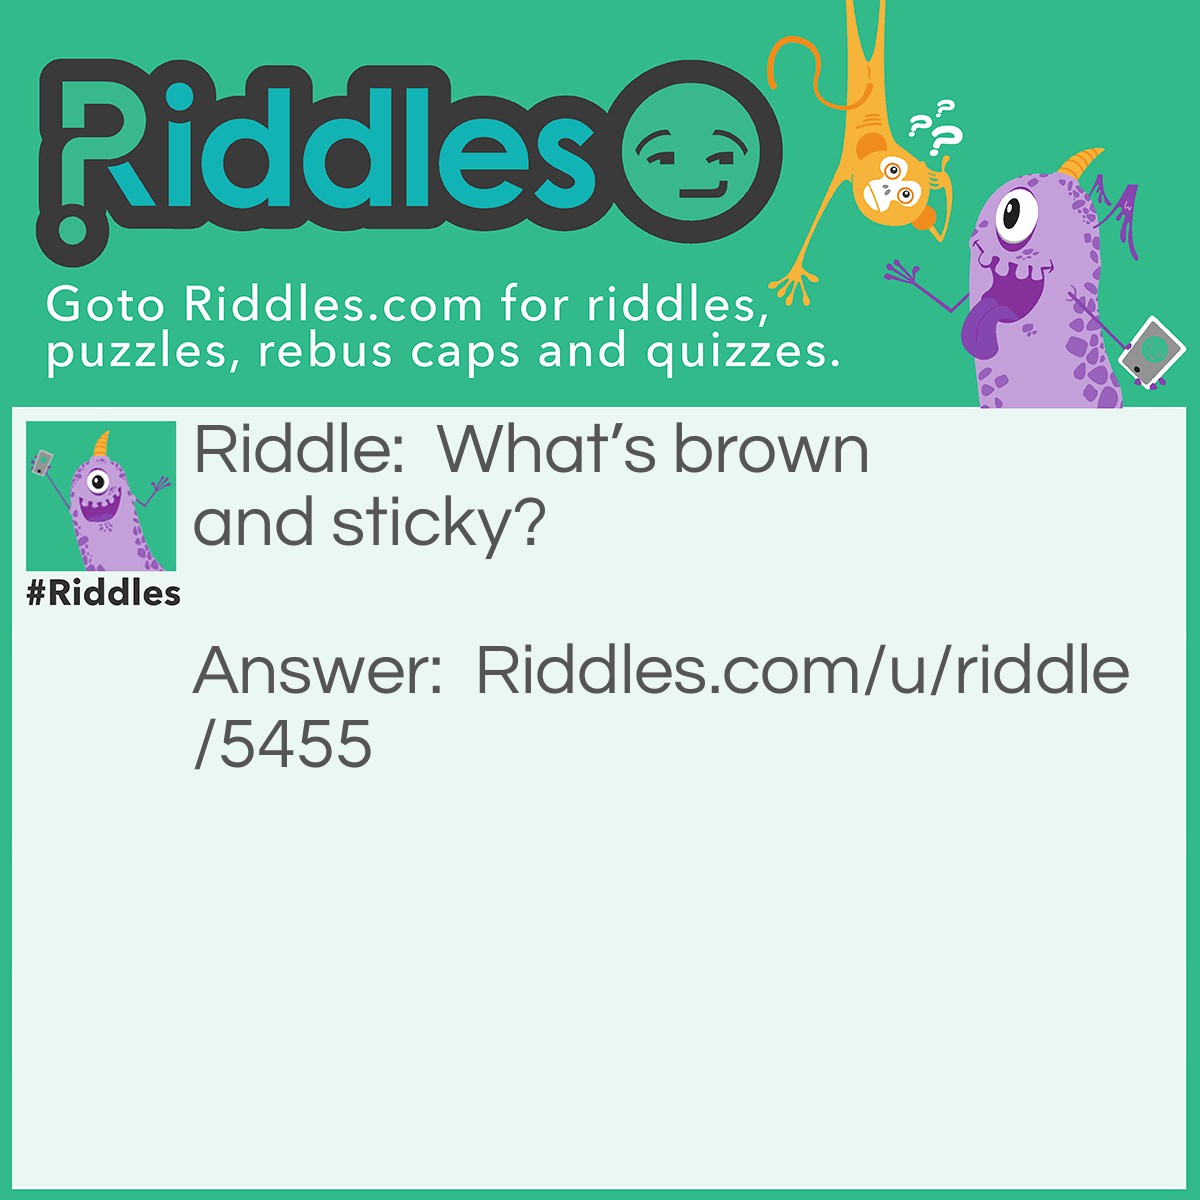 Riddle: What's brown and sticky? Answer: A stick.